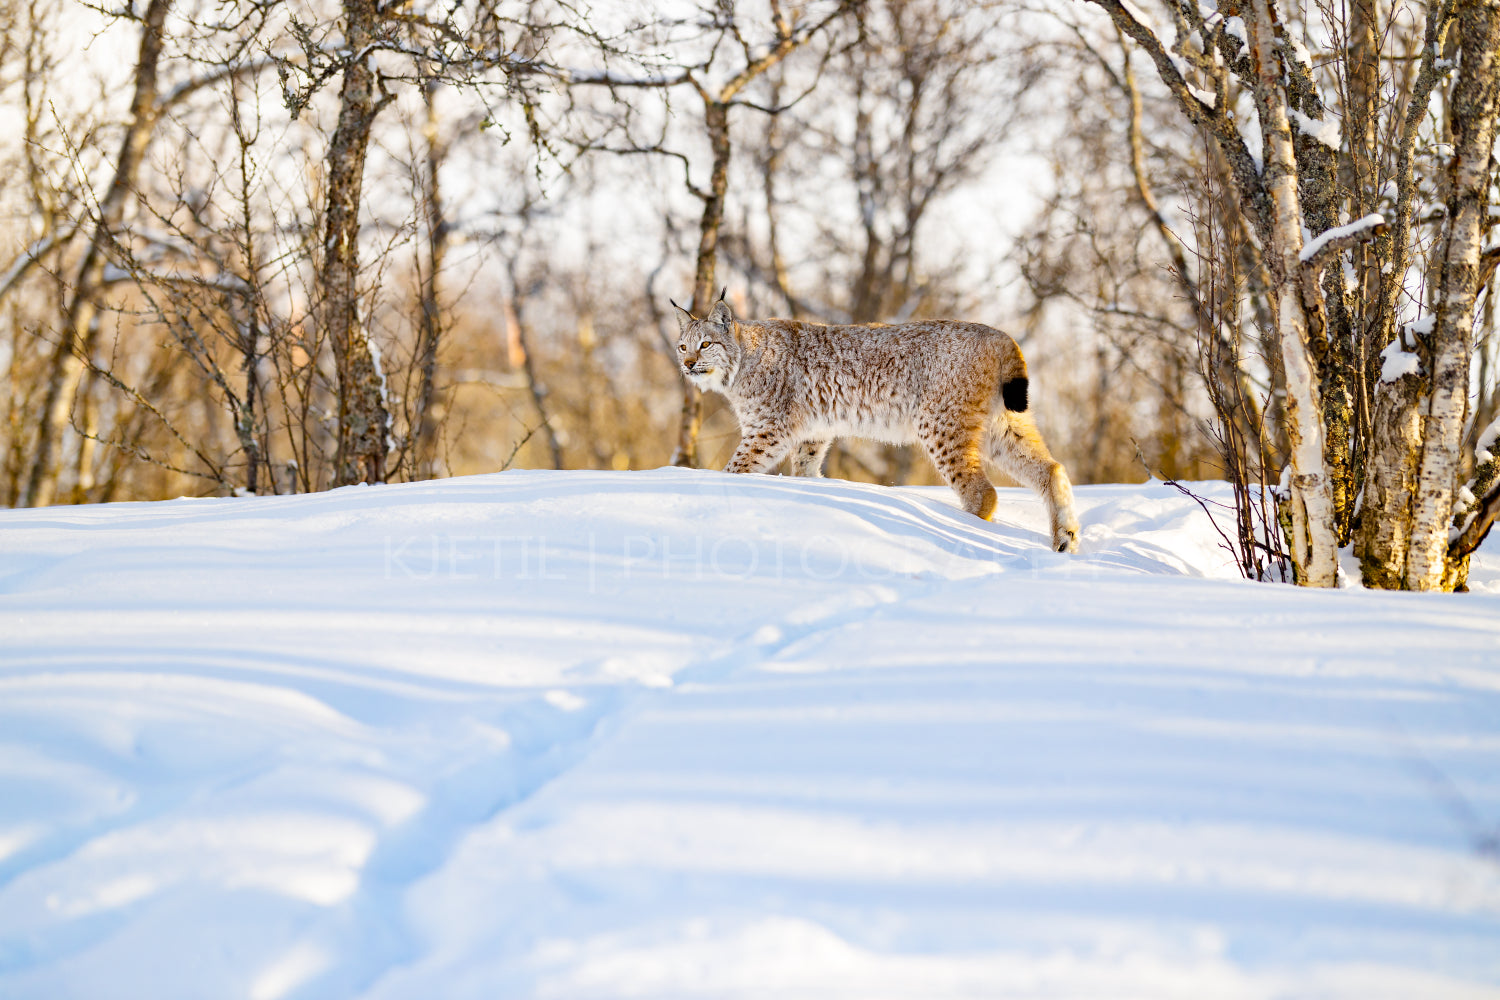 Lynx strolling on snow by bare trees in the forest